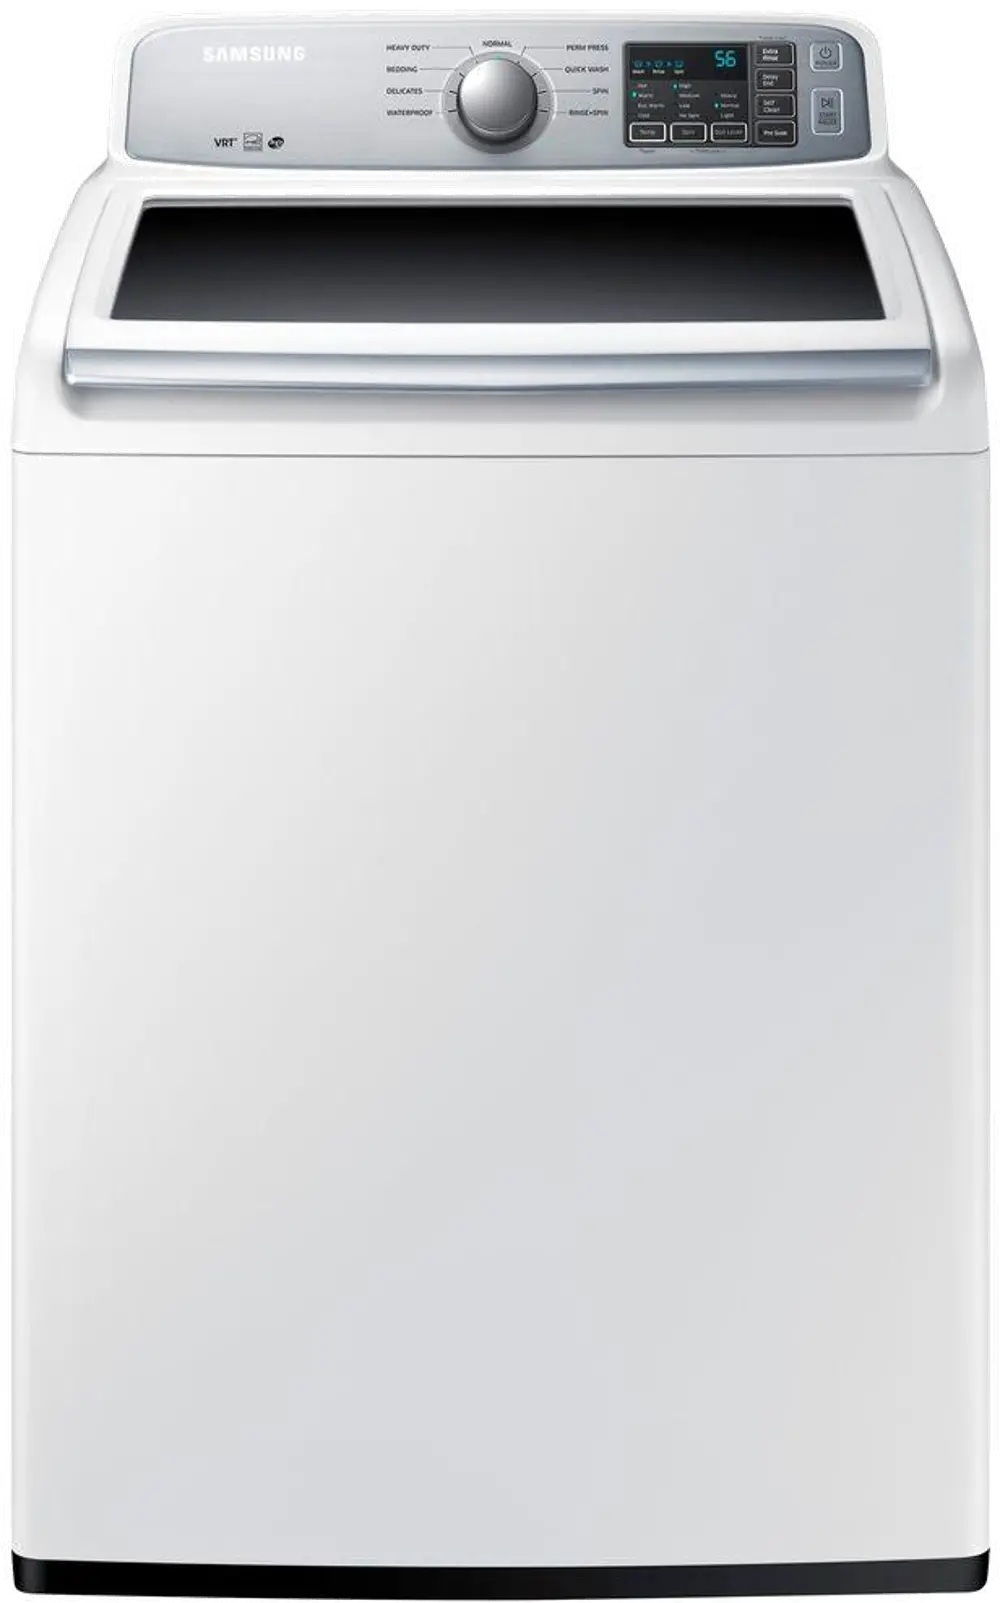 WA45H7000AW Samsung White 4.5 cu. ft. ENERGY STAR Top Load Washer-1